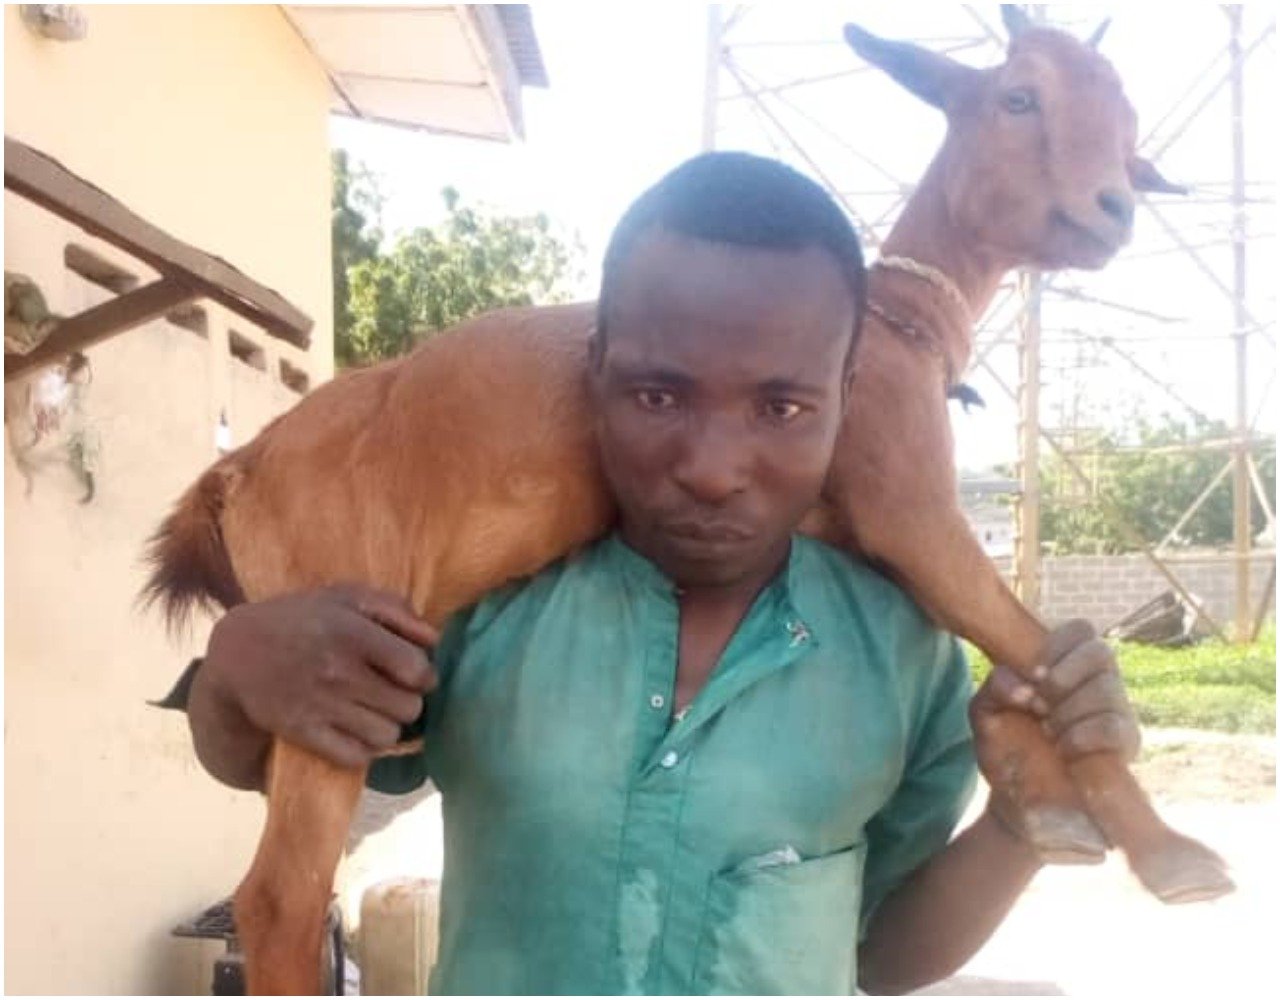 Goat Theft Arrested in Kaiama